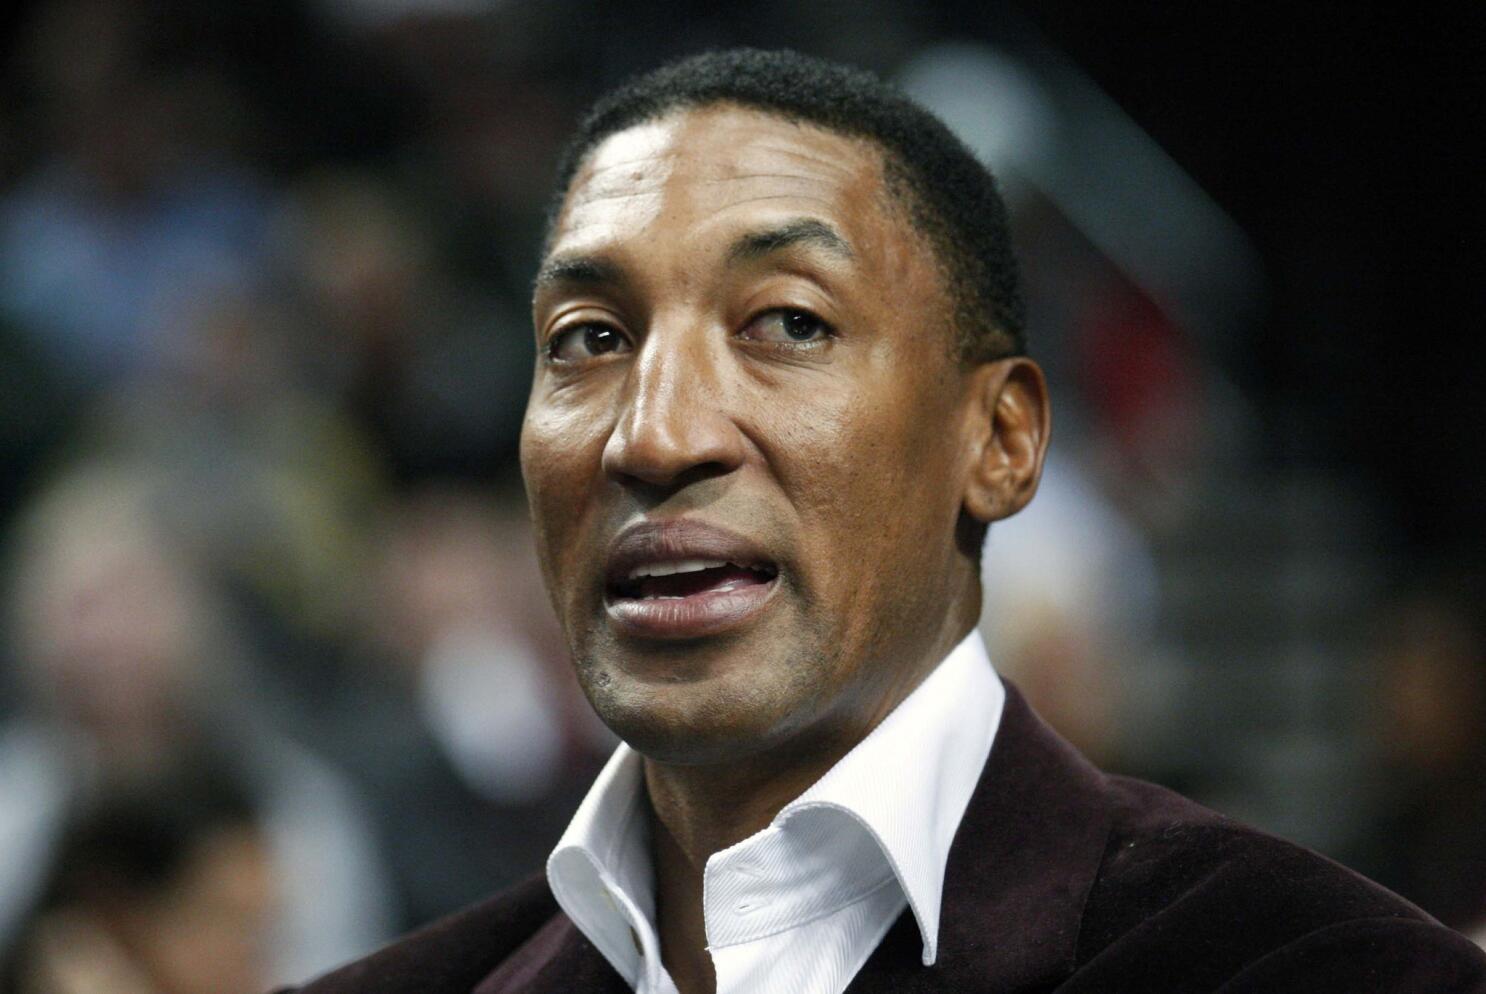 Scottie Pippen sells books, but hurts his reputation, with attacks